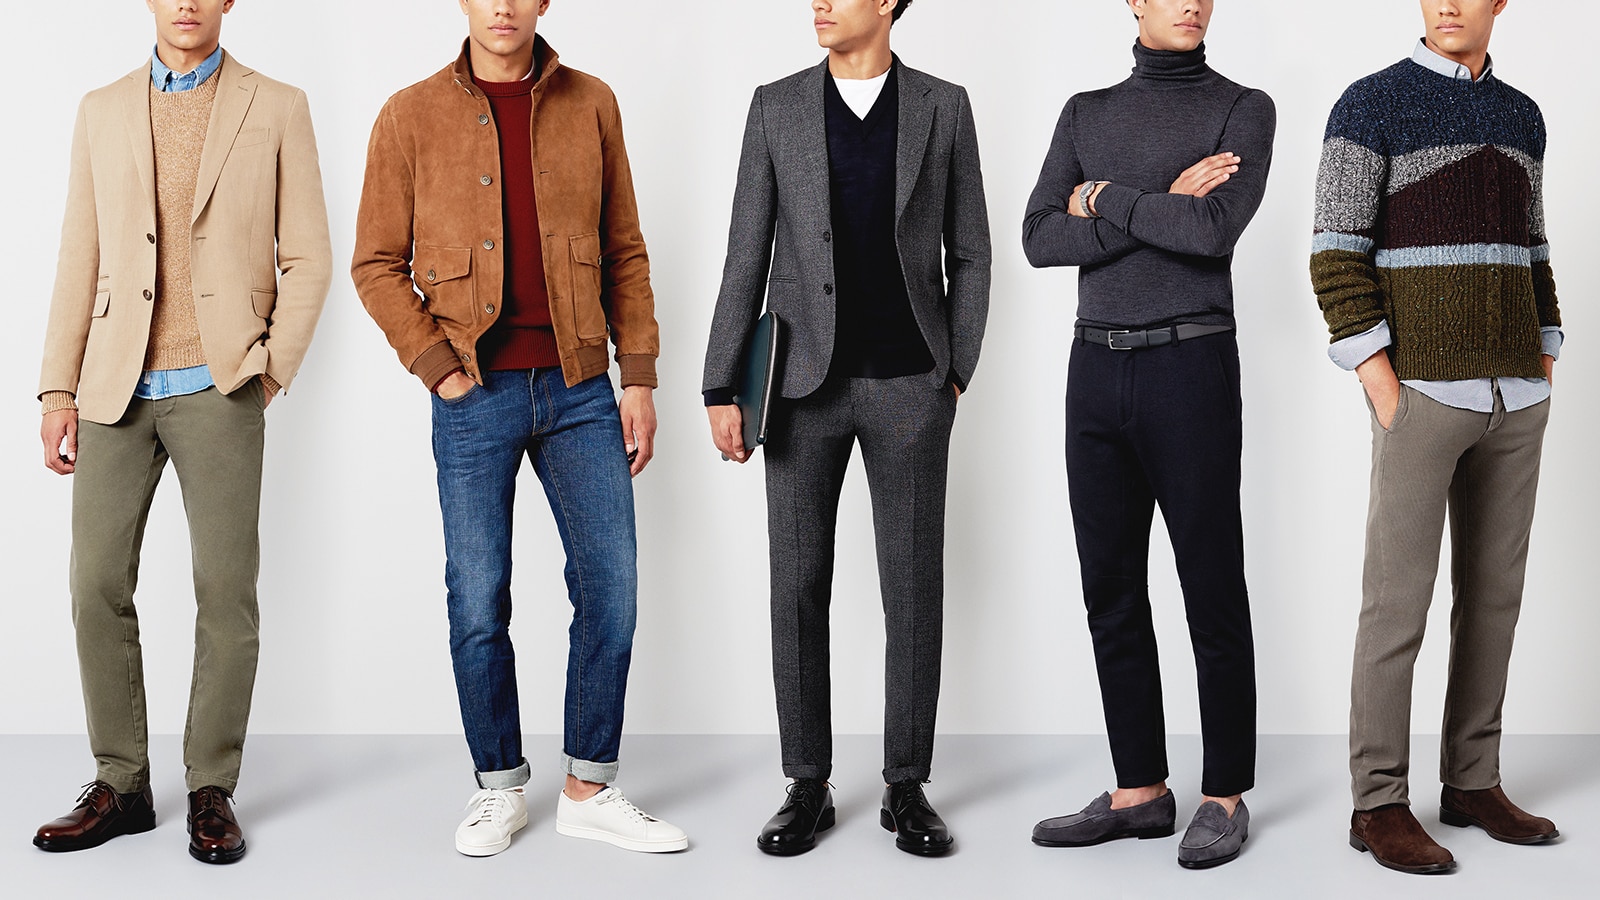 Men's smart casual: What it means and how to dress for it - The Collective